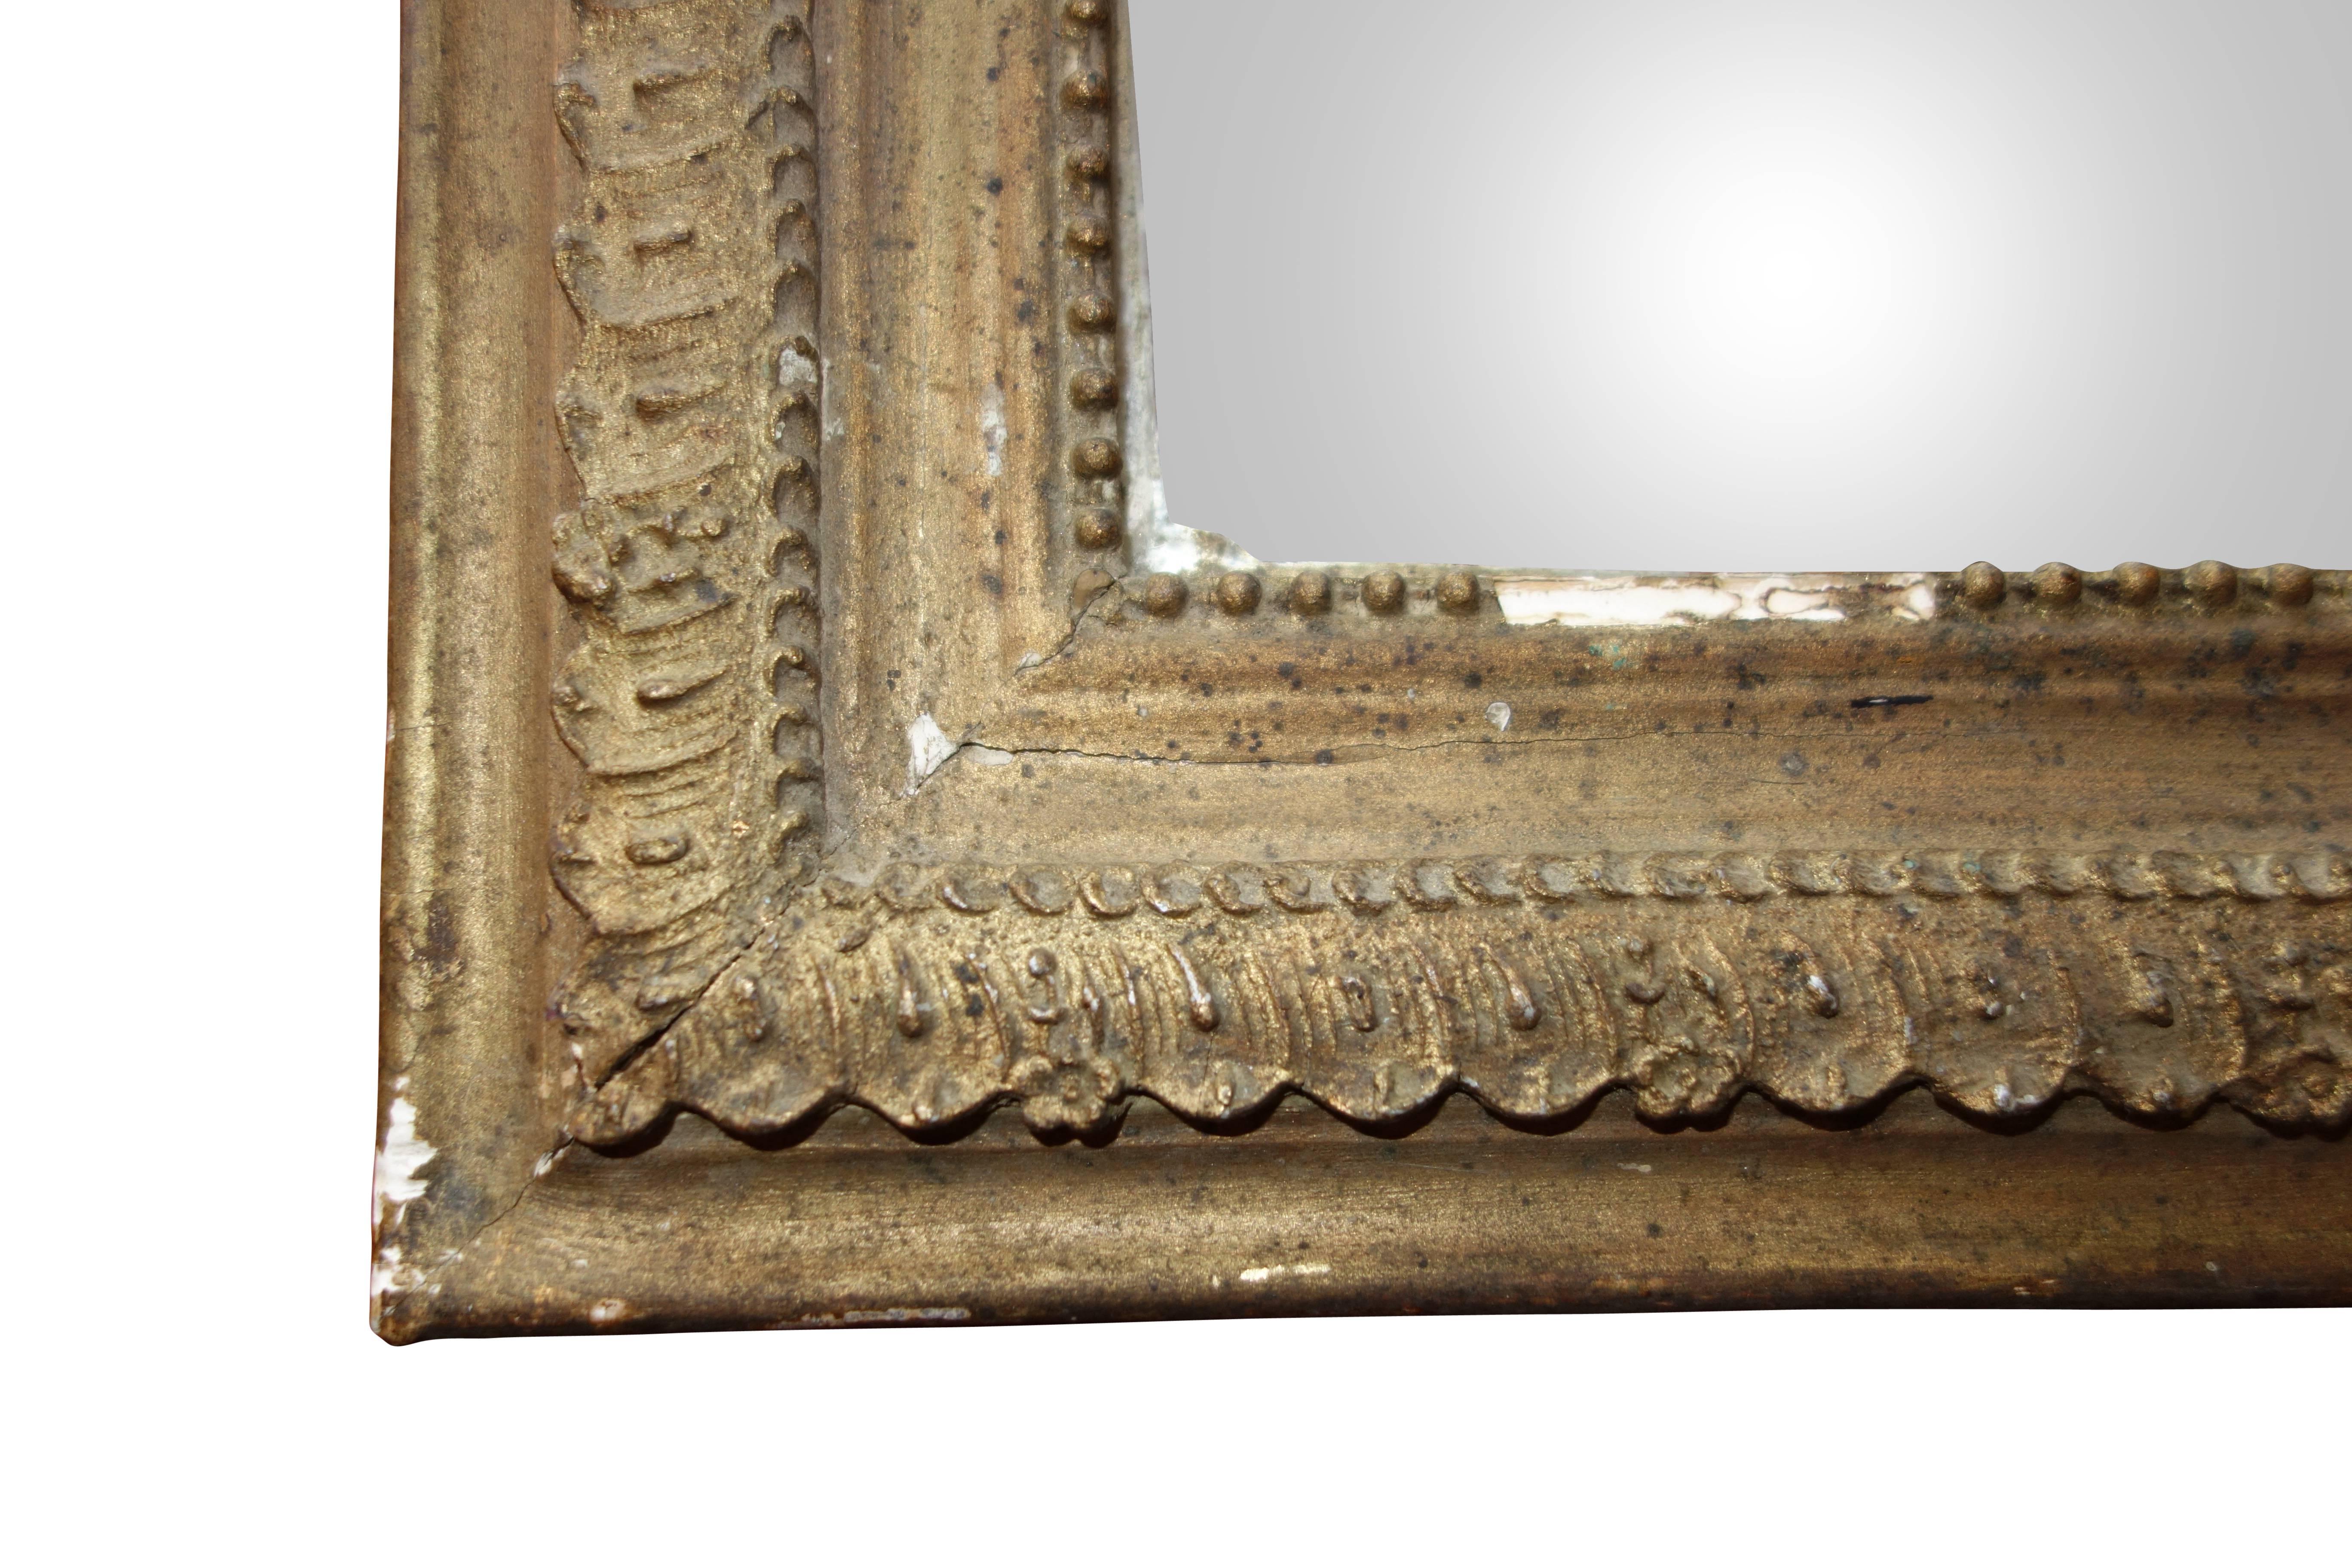 This is a small turn of the century gold framed mirror from France.